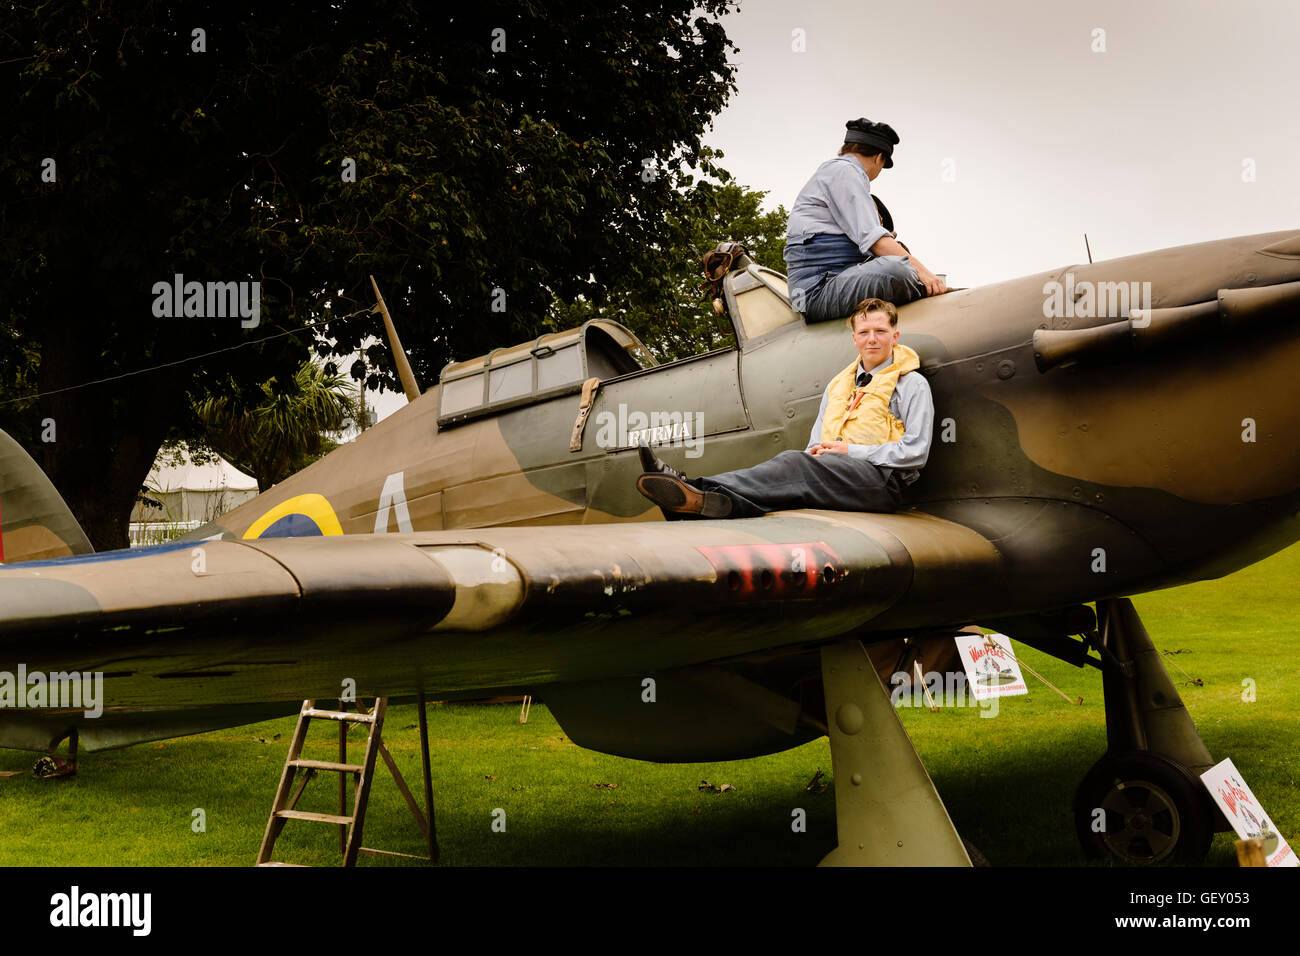 A Spitfire fighter plane on display at The War And Peace Revival event in Hyte. Stock Photo